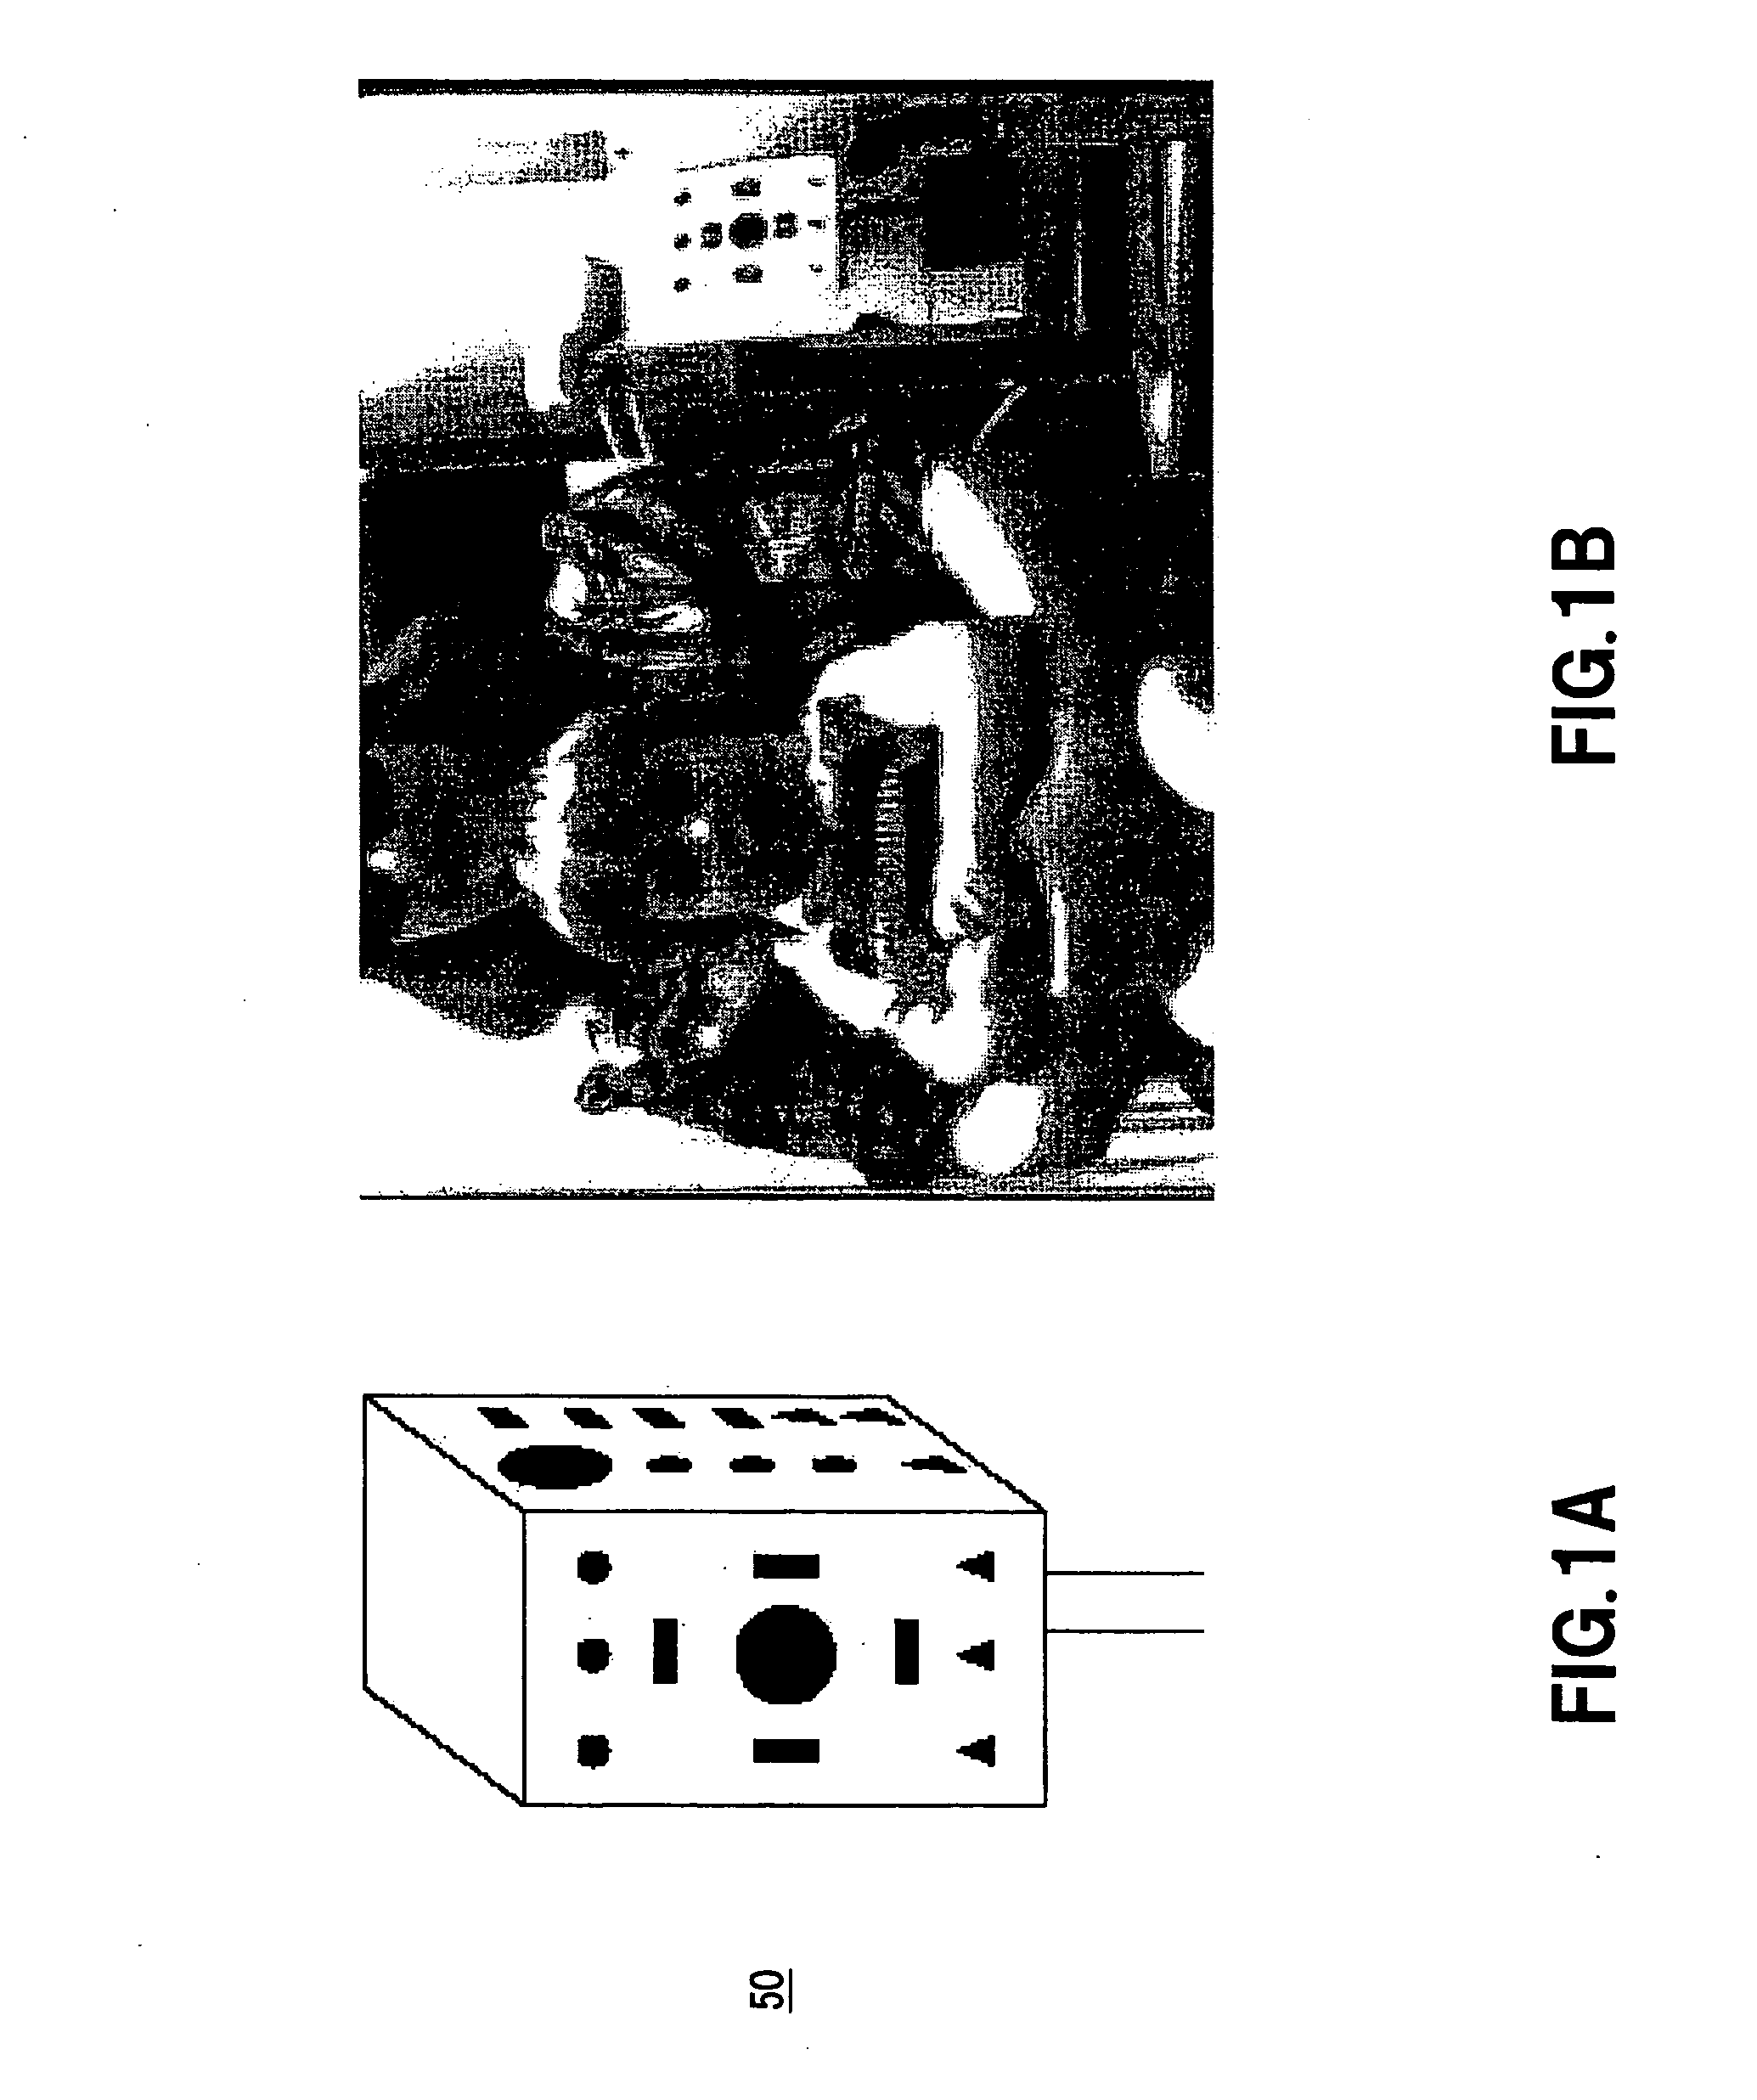 Interaction device